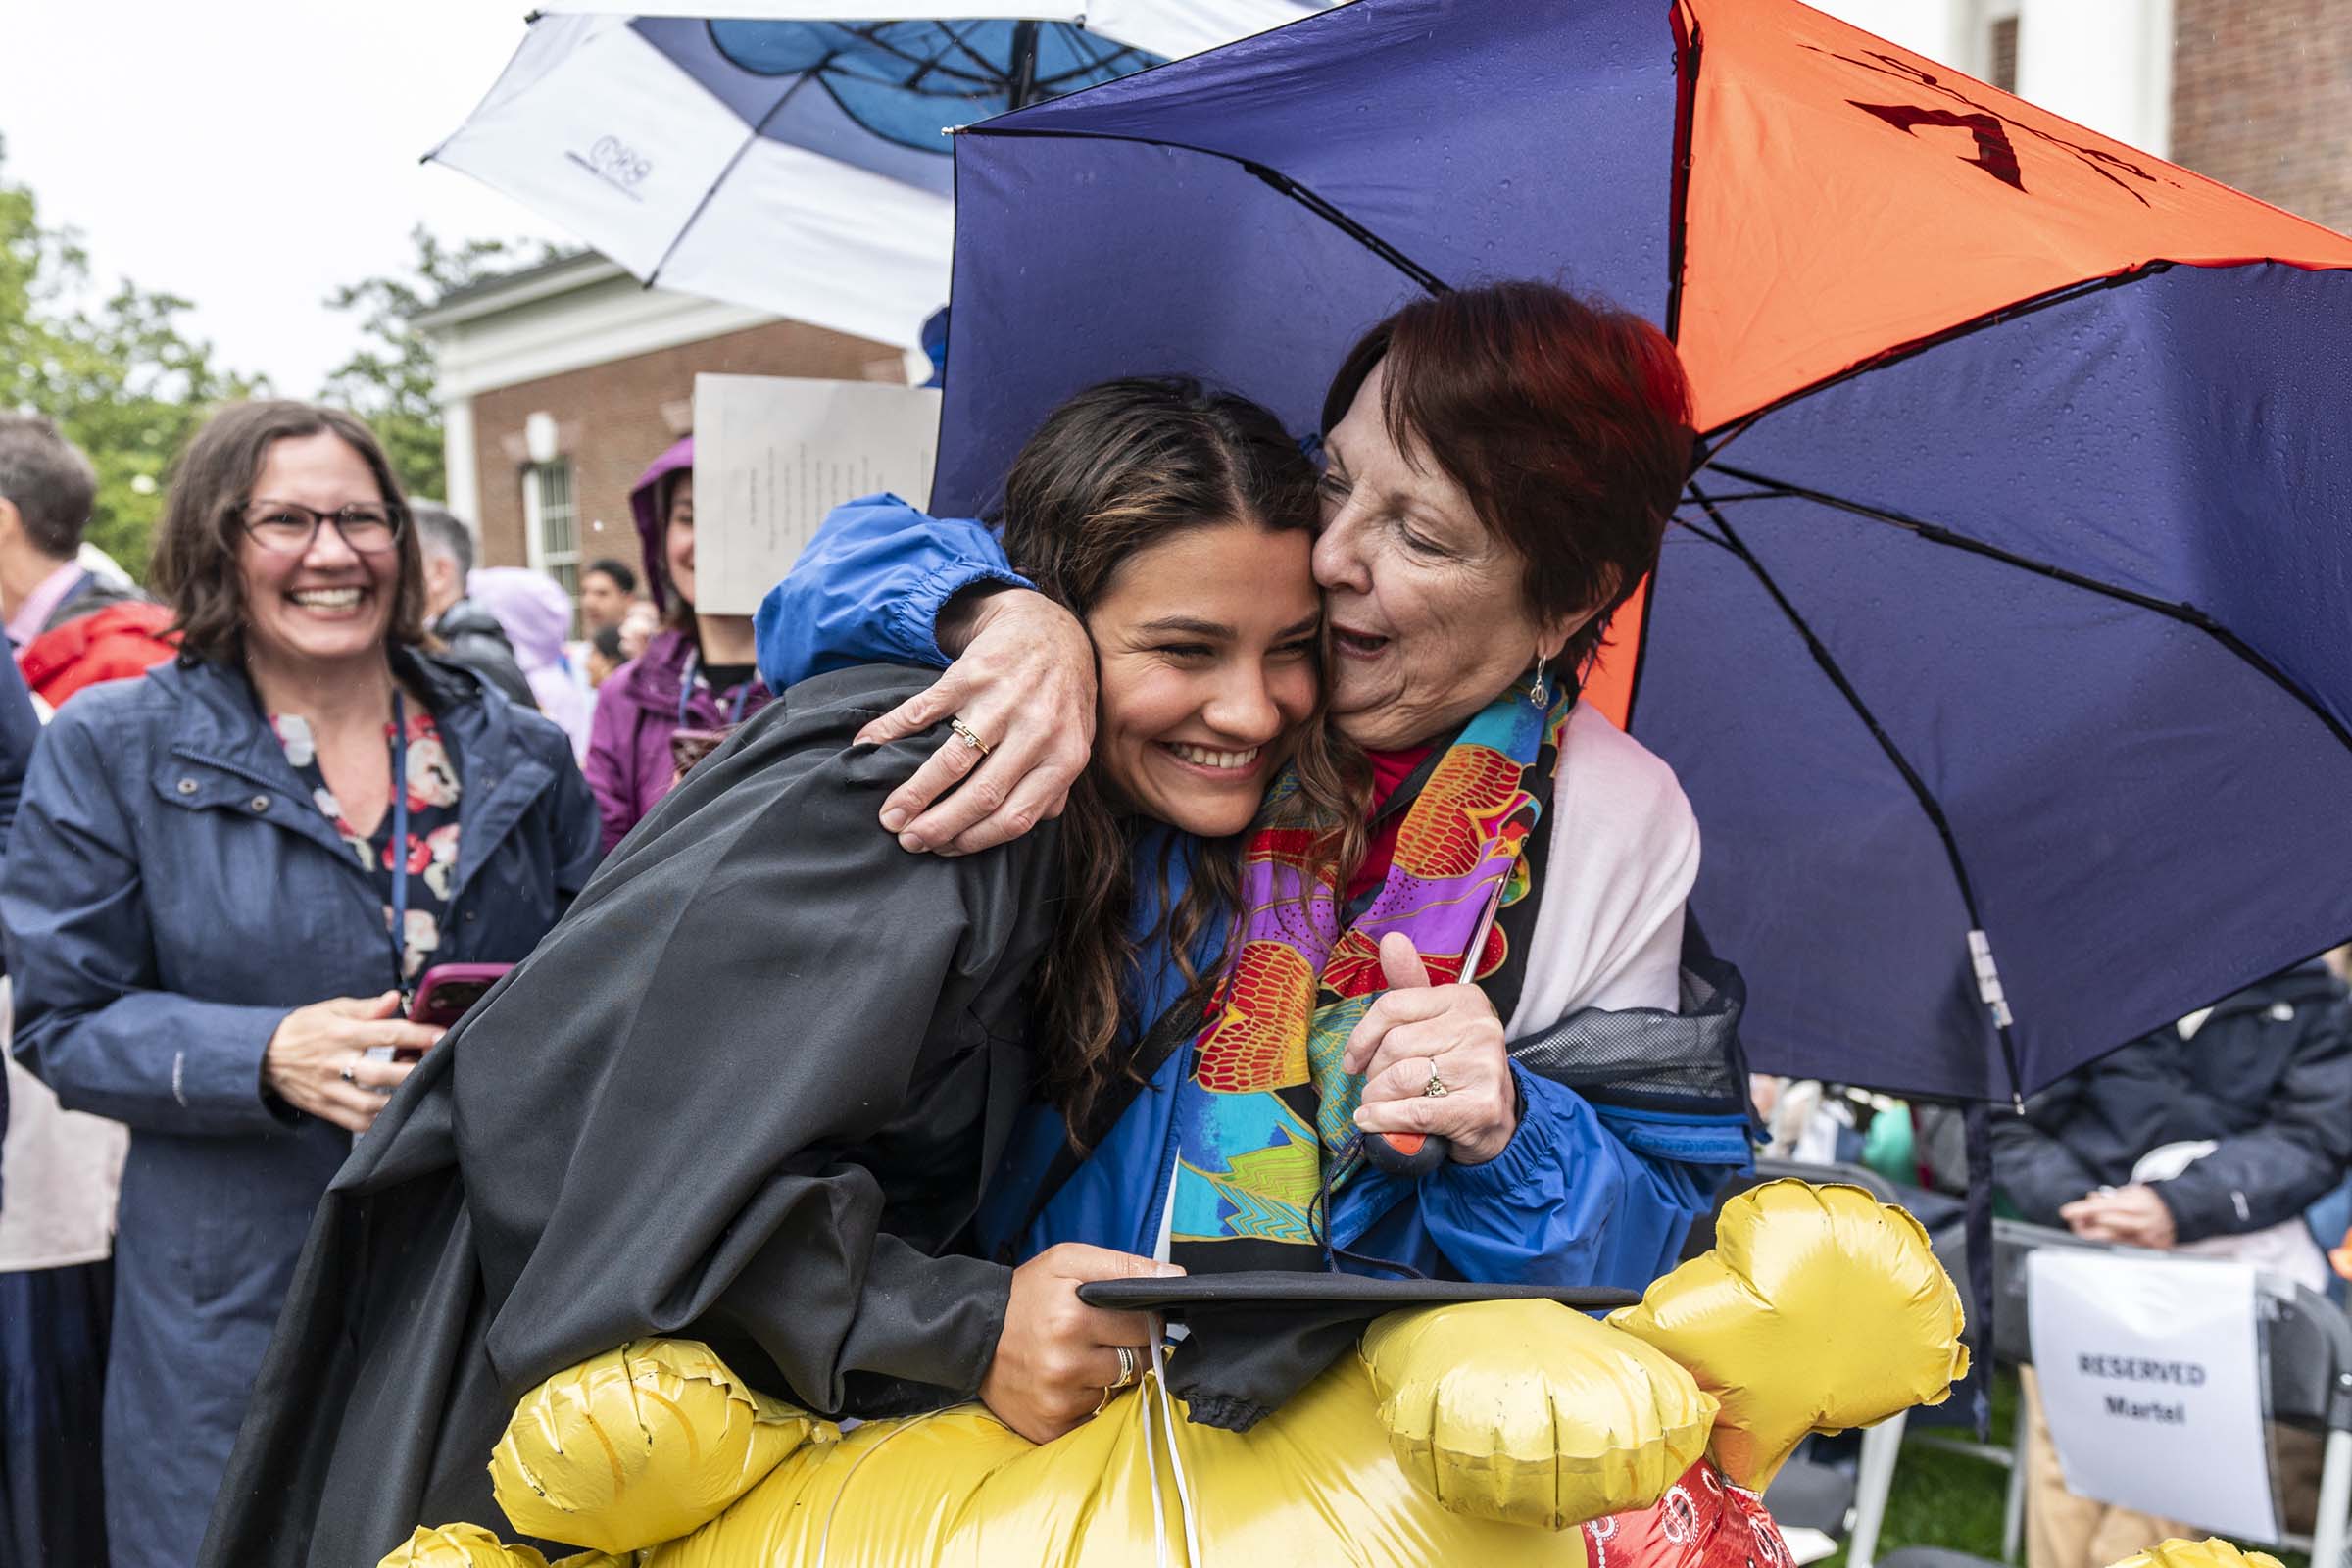 Student with loved one embracing excitedly with balloons under an orange and blue Virginia umbrella